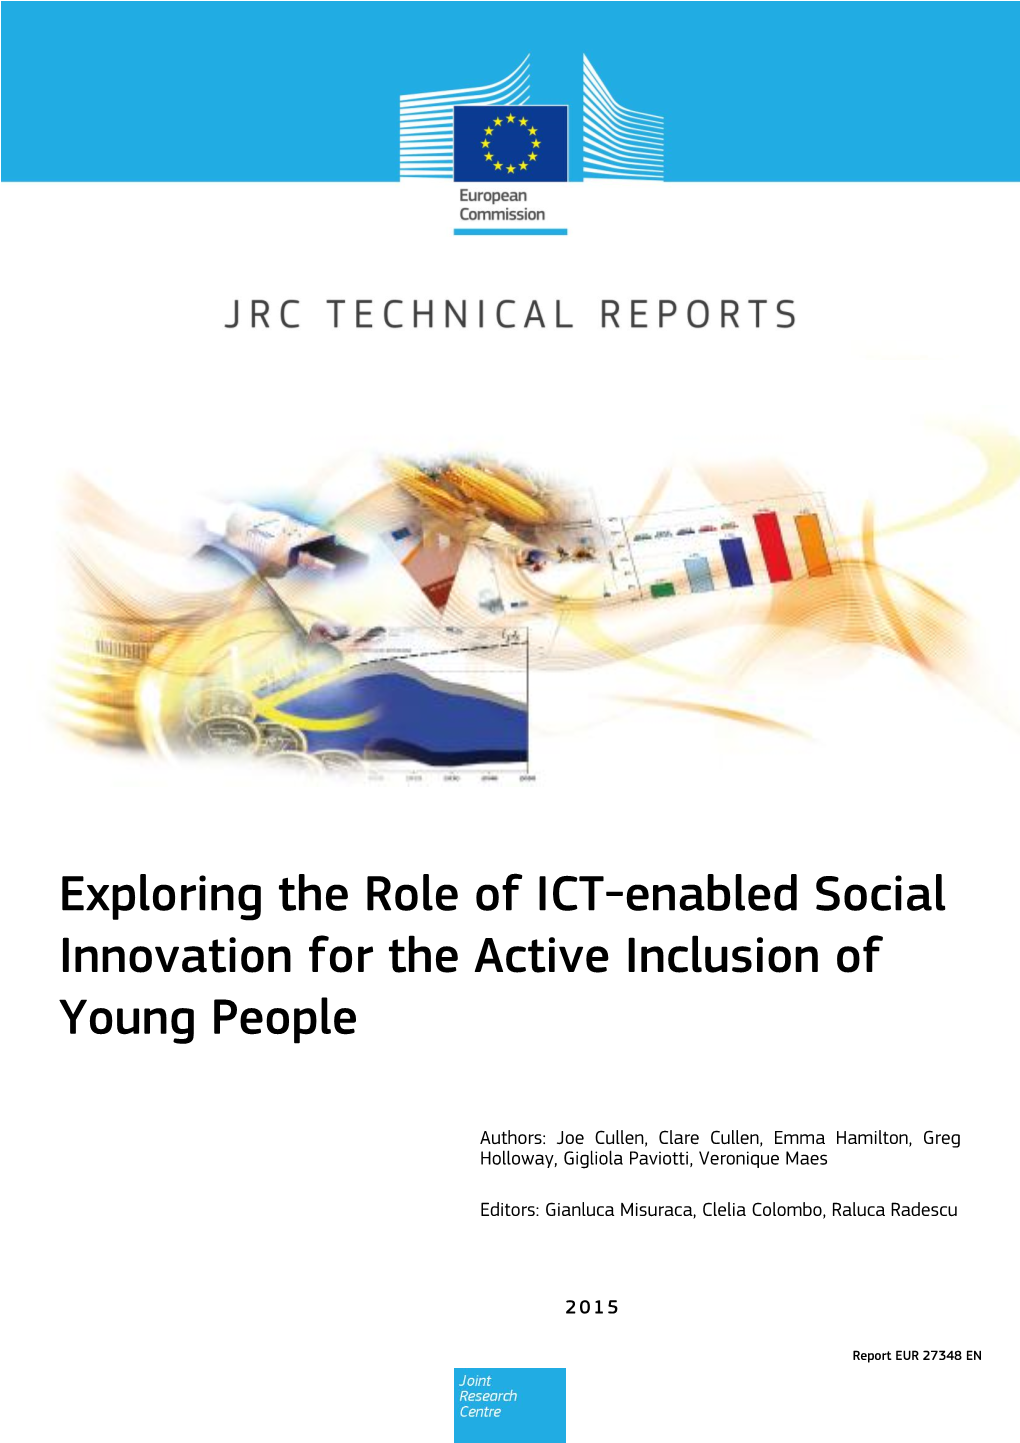 Exploring the Role of ICT-Enabled Social Innovation for the Active Inclusion of Young People